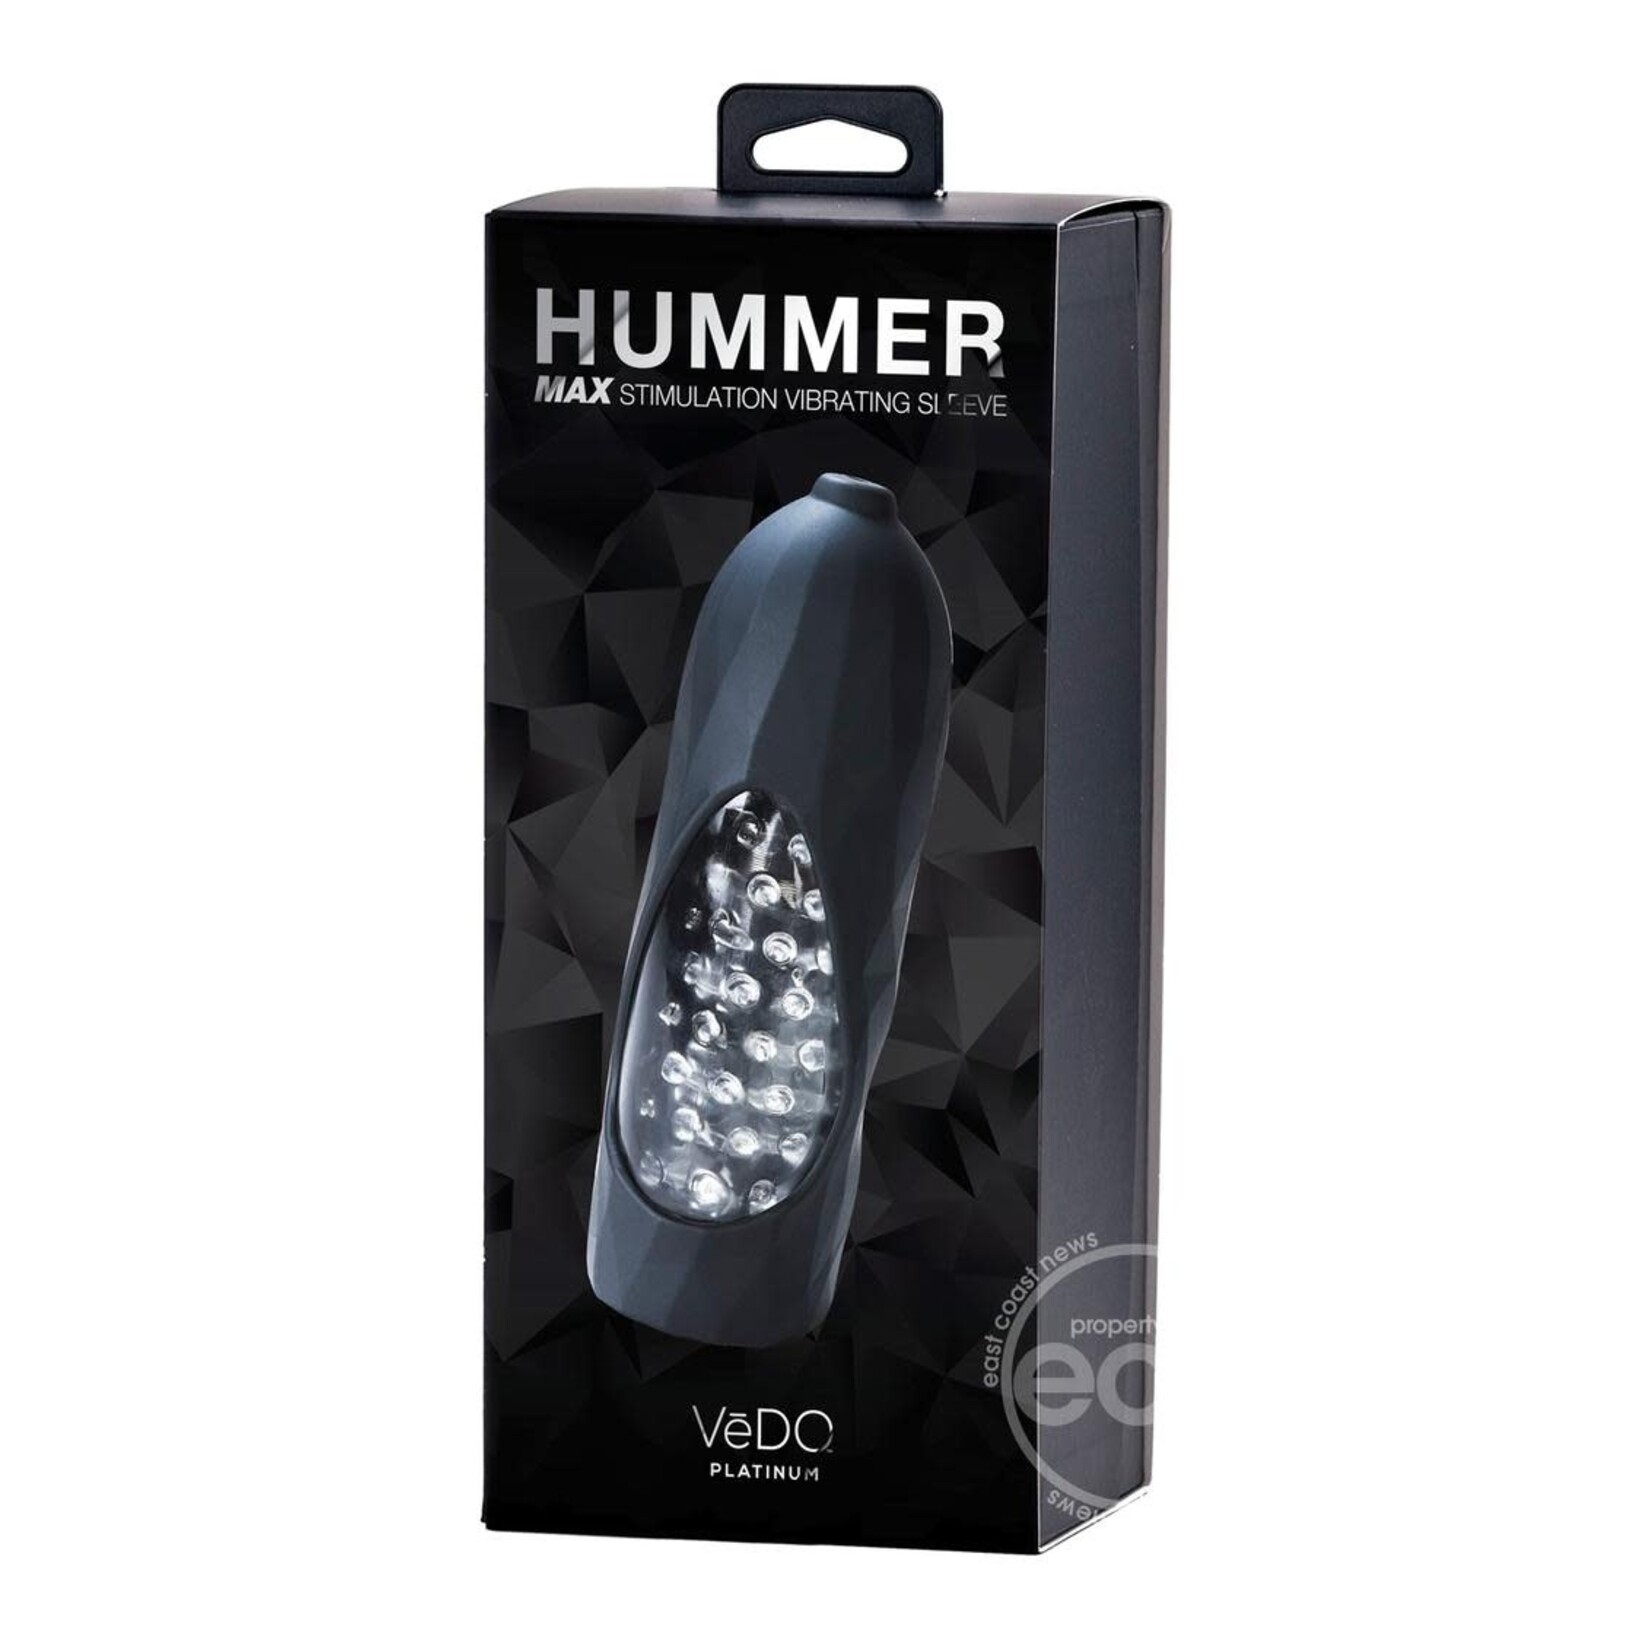 VeDO Hummer 2.0 Silicone Rechargeable Vibrating Stroker - Crystal Clear/Black Pearl